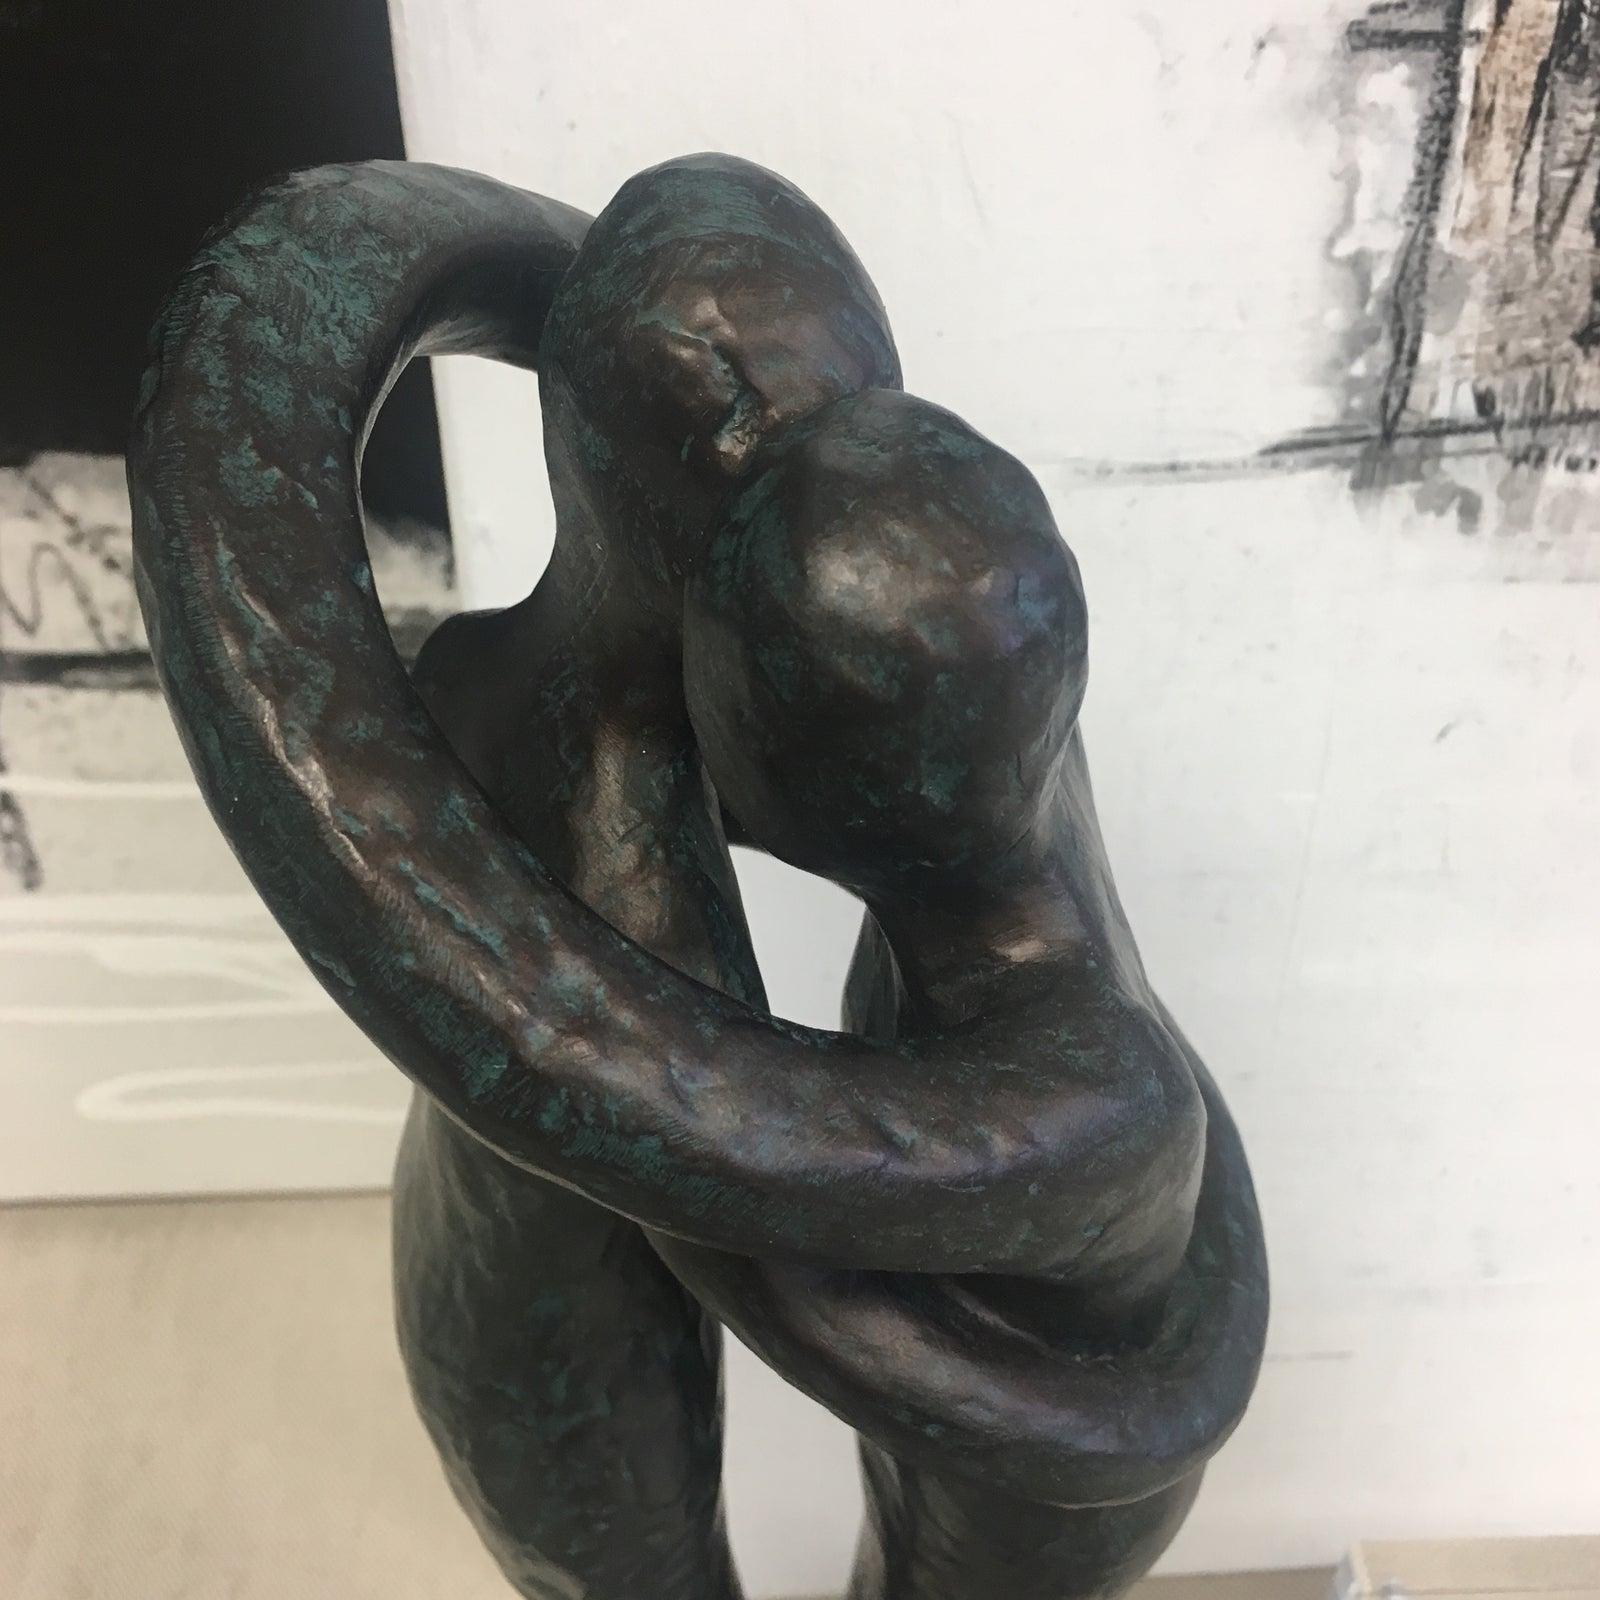 Vintage Figurative Embrassing Couple Statue  - Black Figurative Sculpture by Unknown